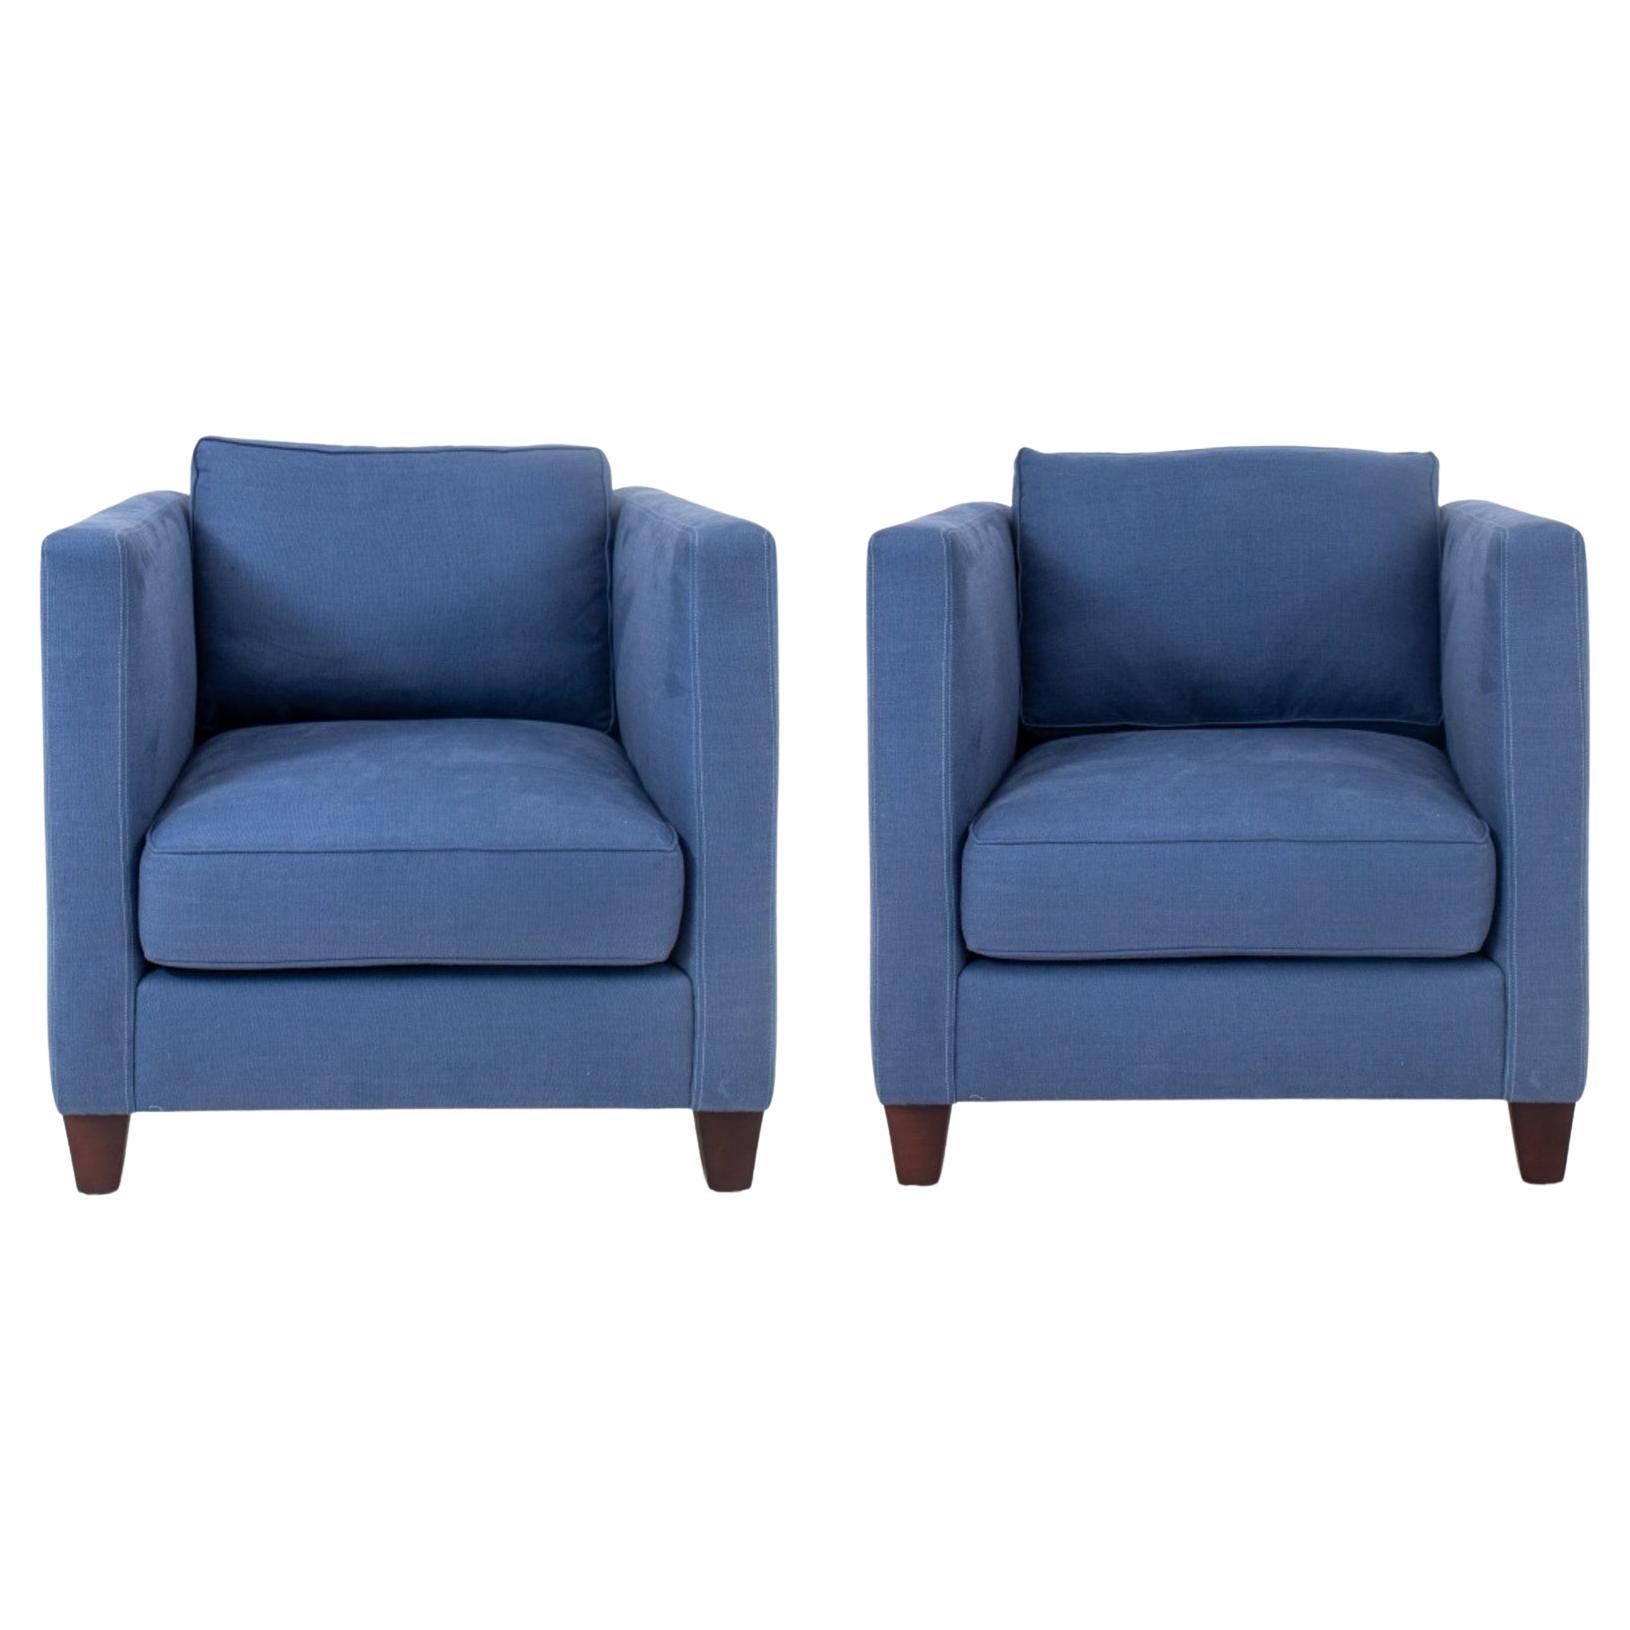 Modern Square Upholstered Arm Chairs, 2